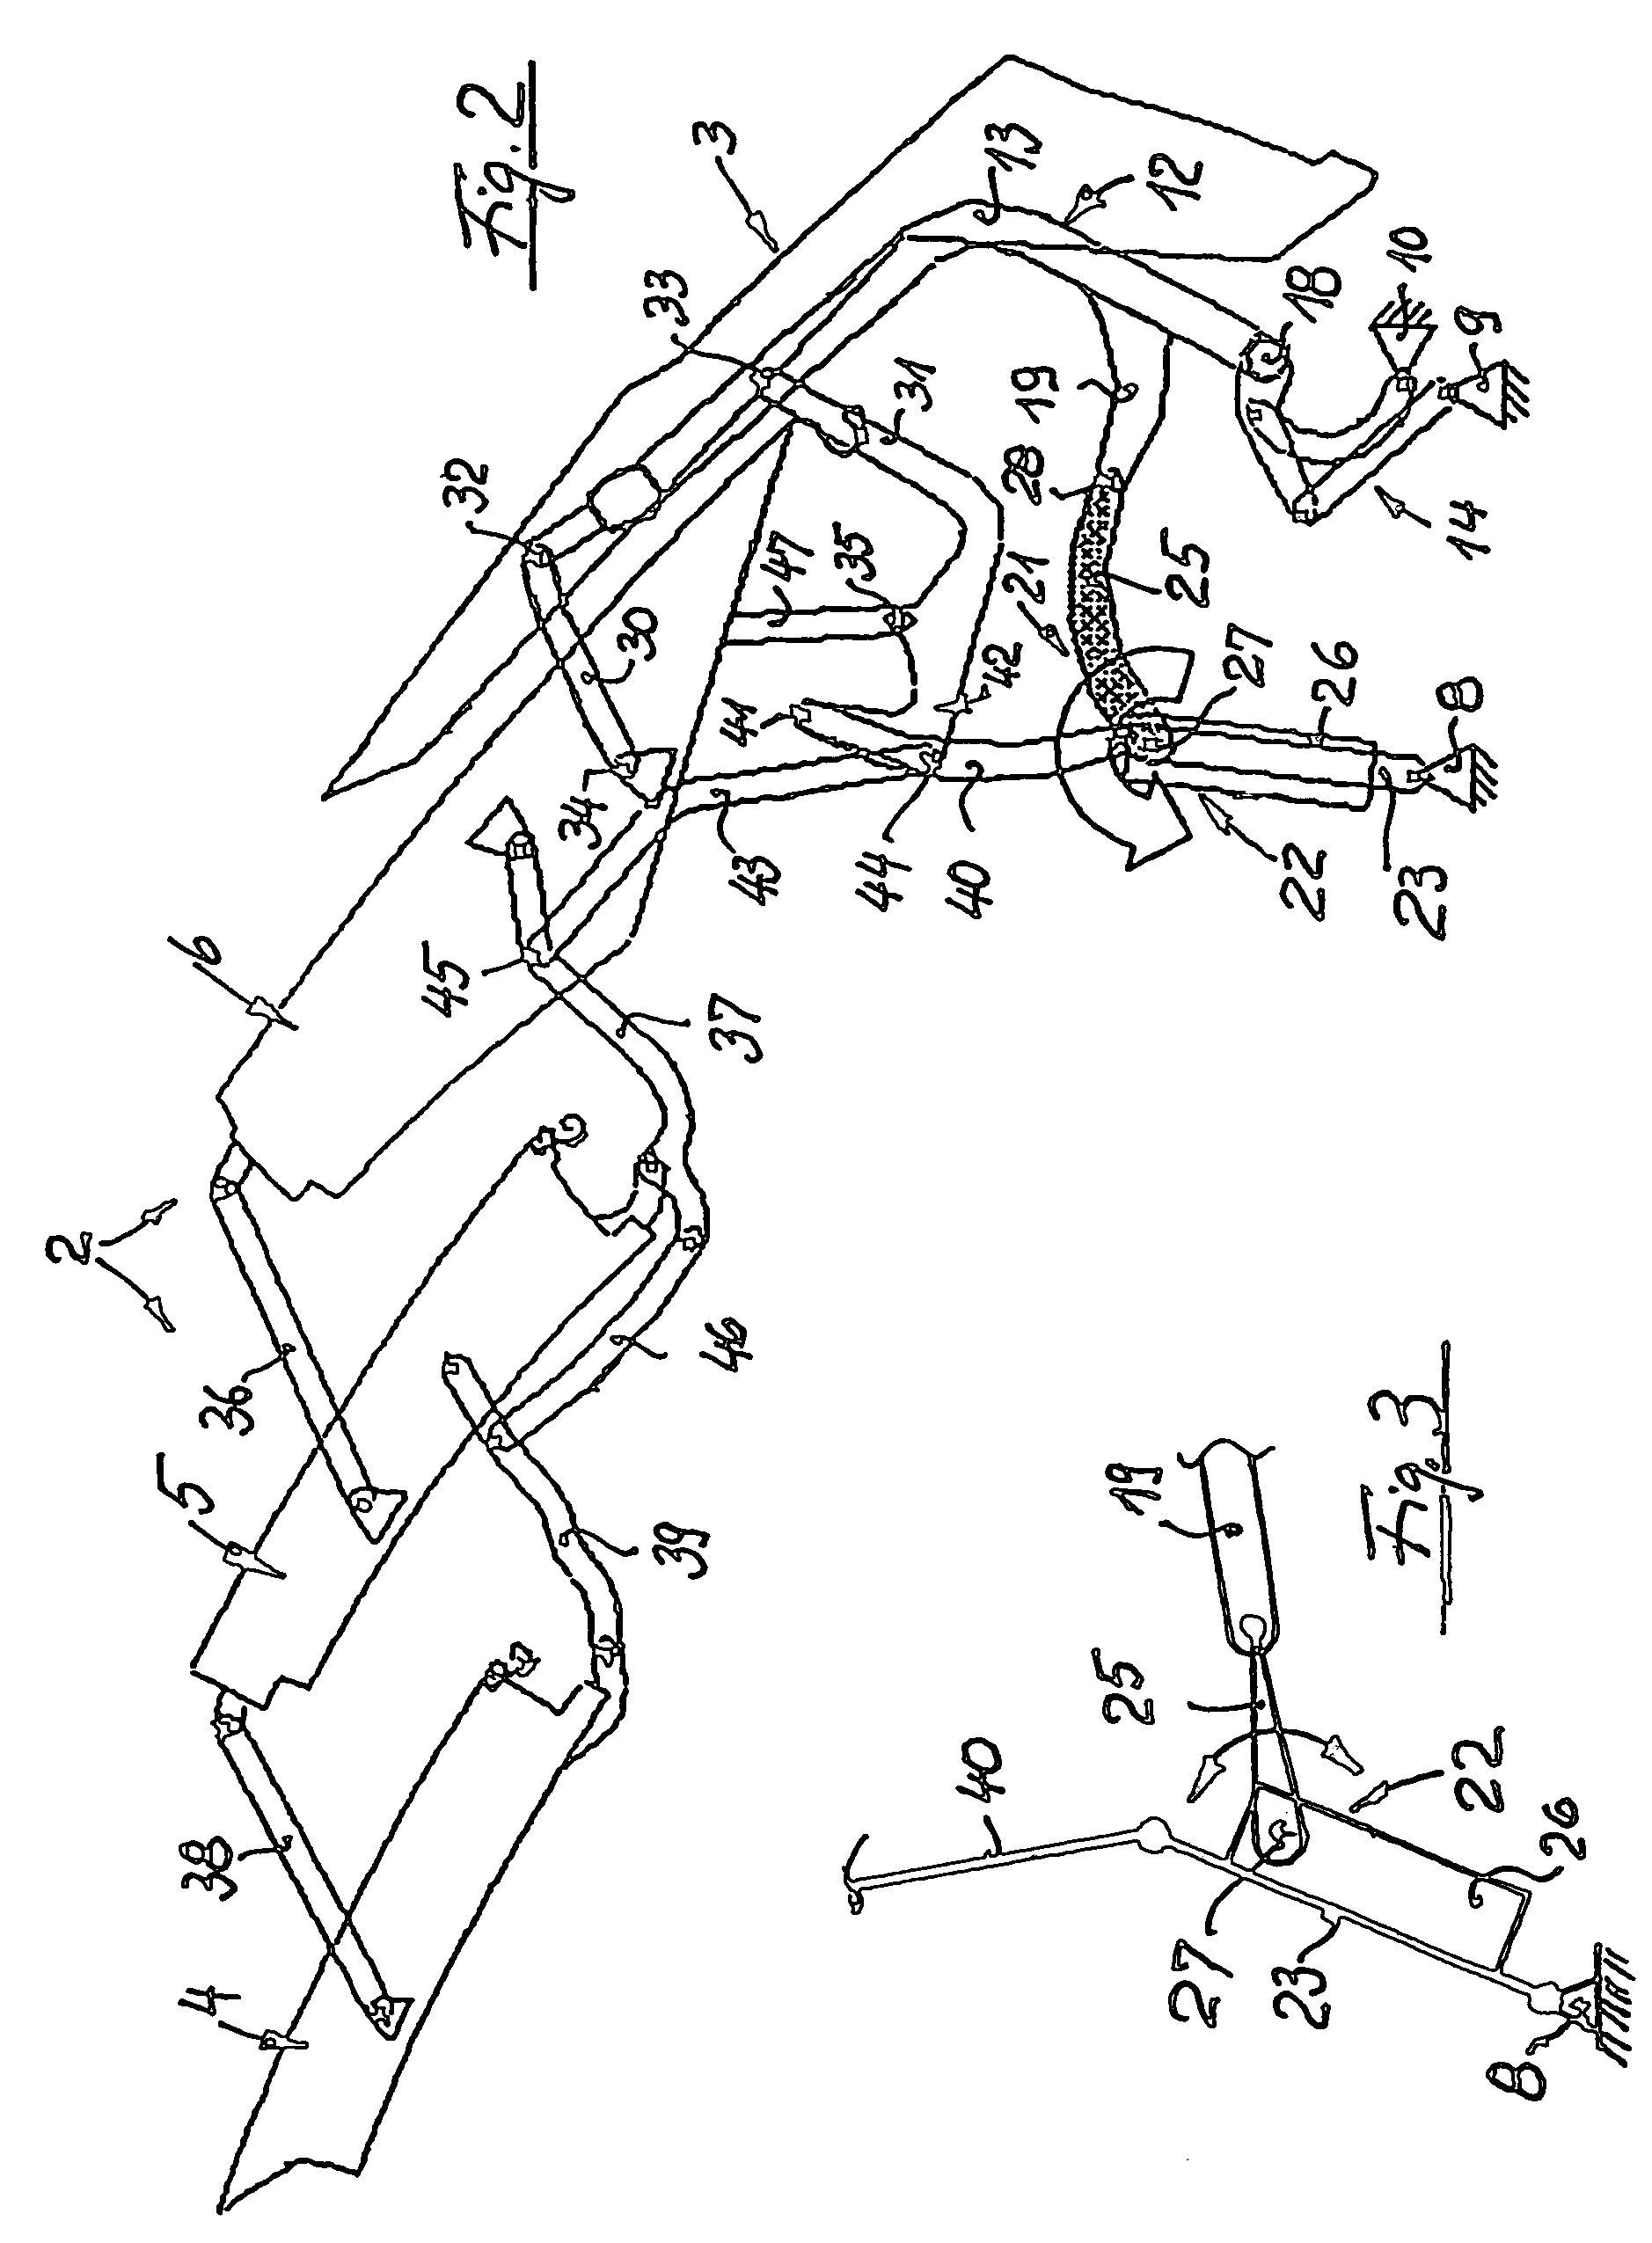 Roof and decklid having a common supporting linkage and actuator